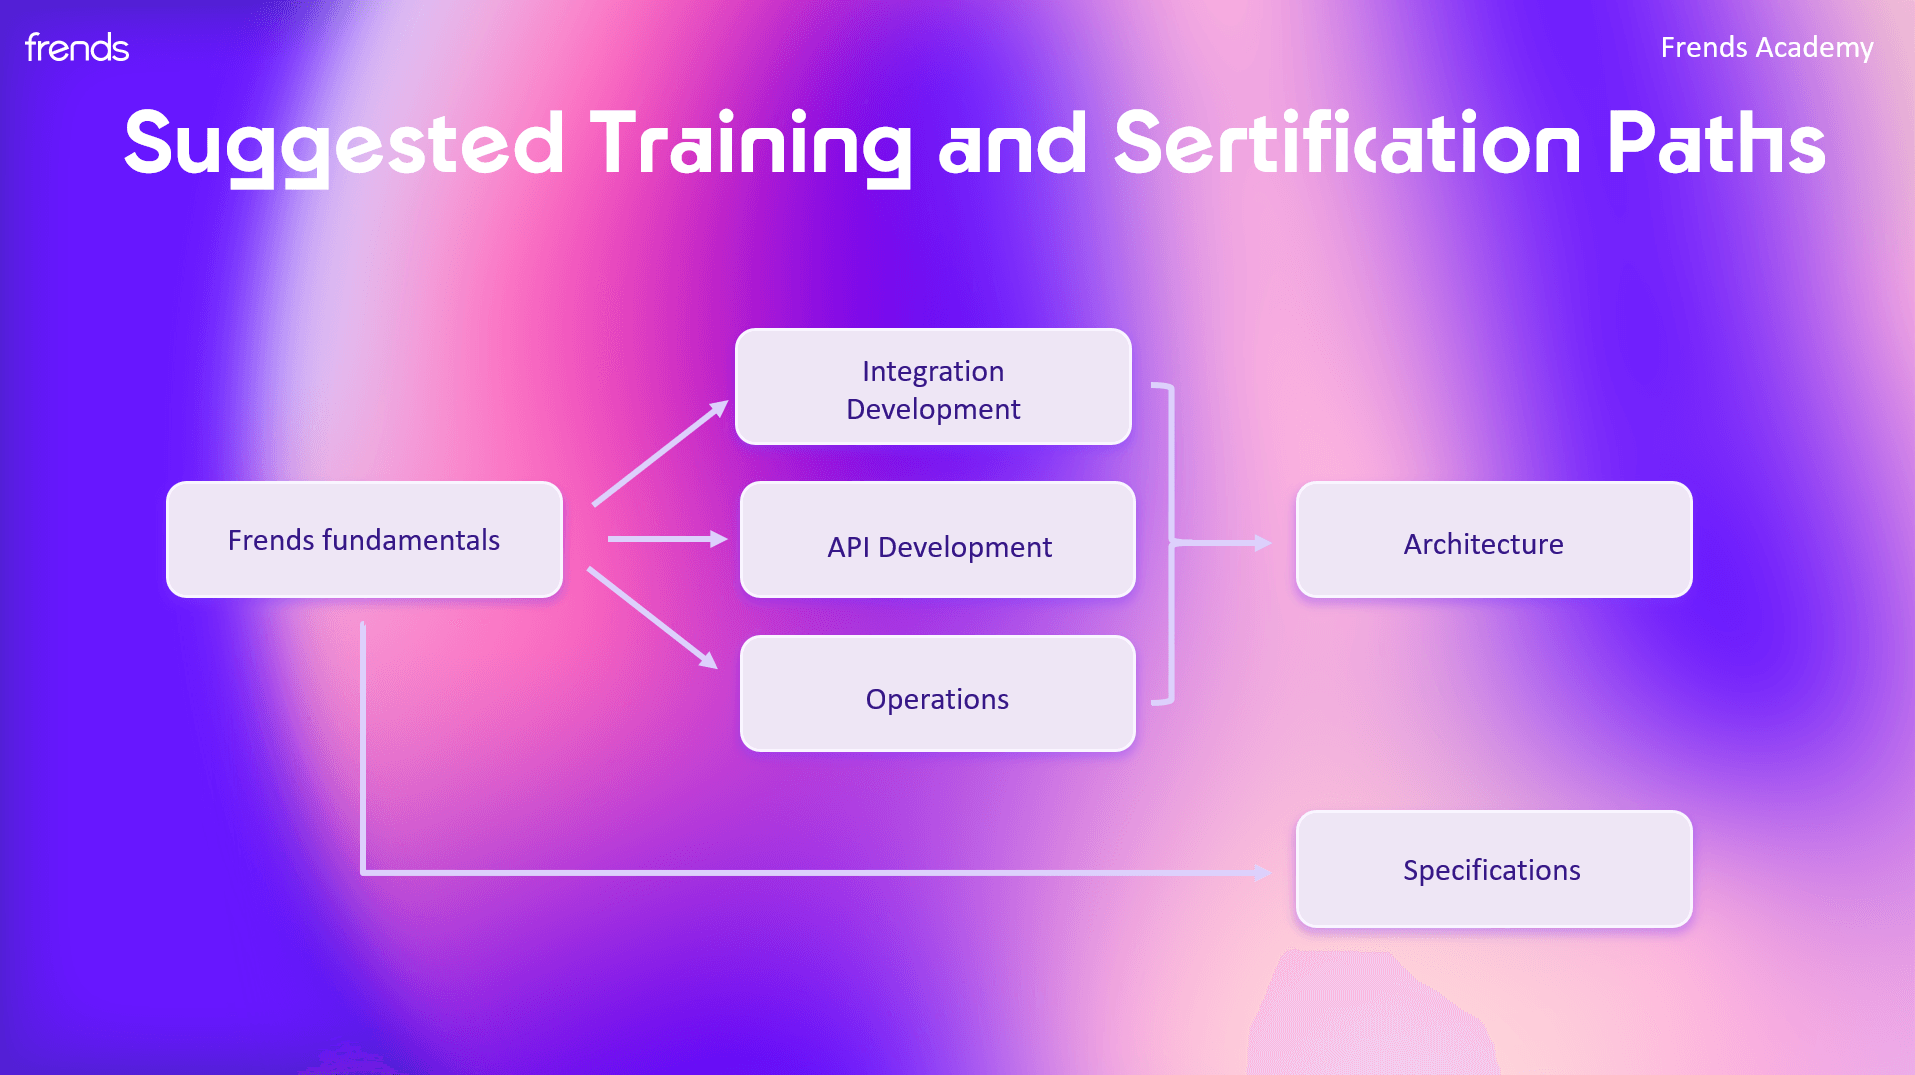 Suggested Training and Sertification Paths